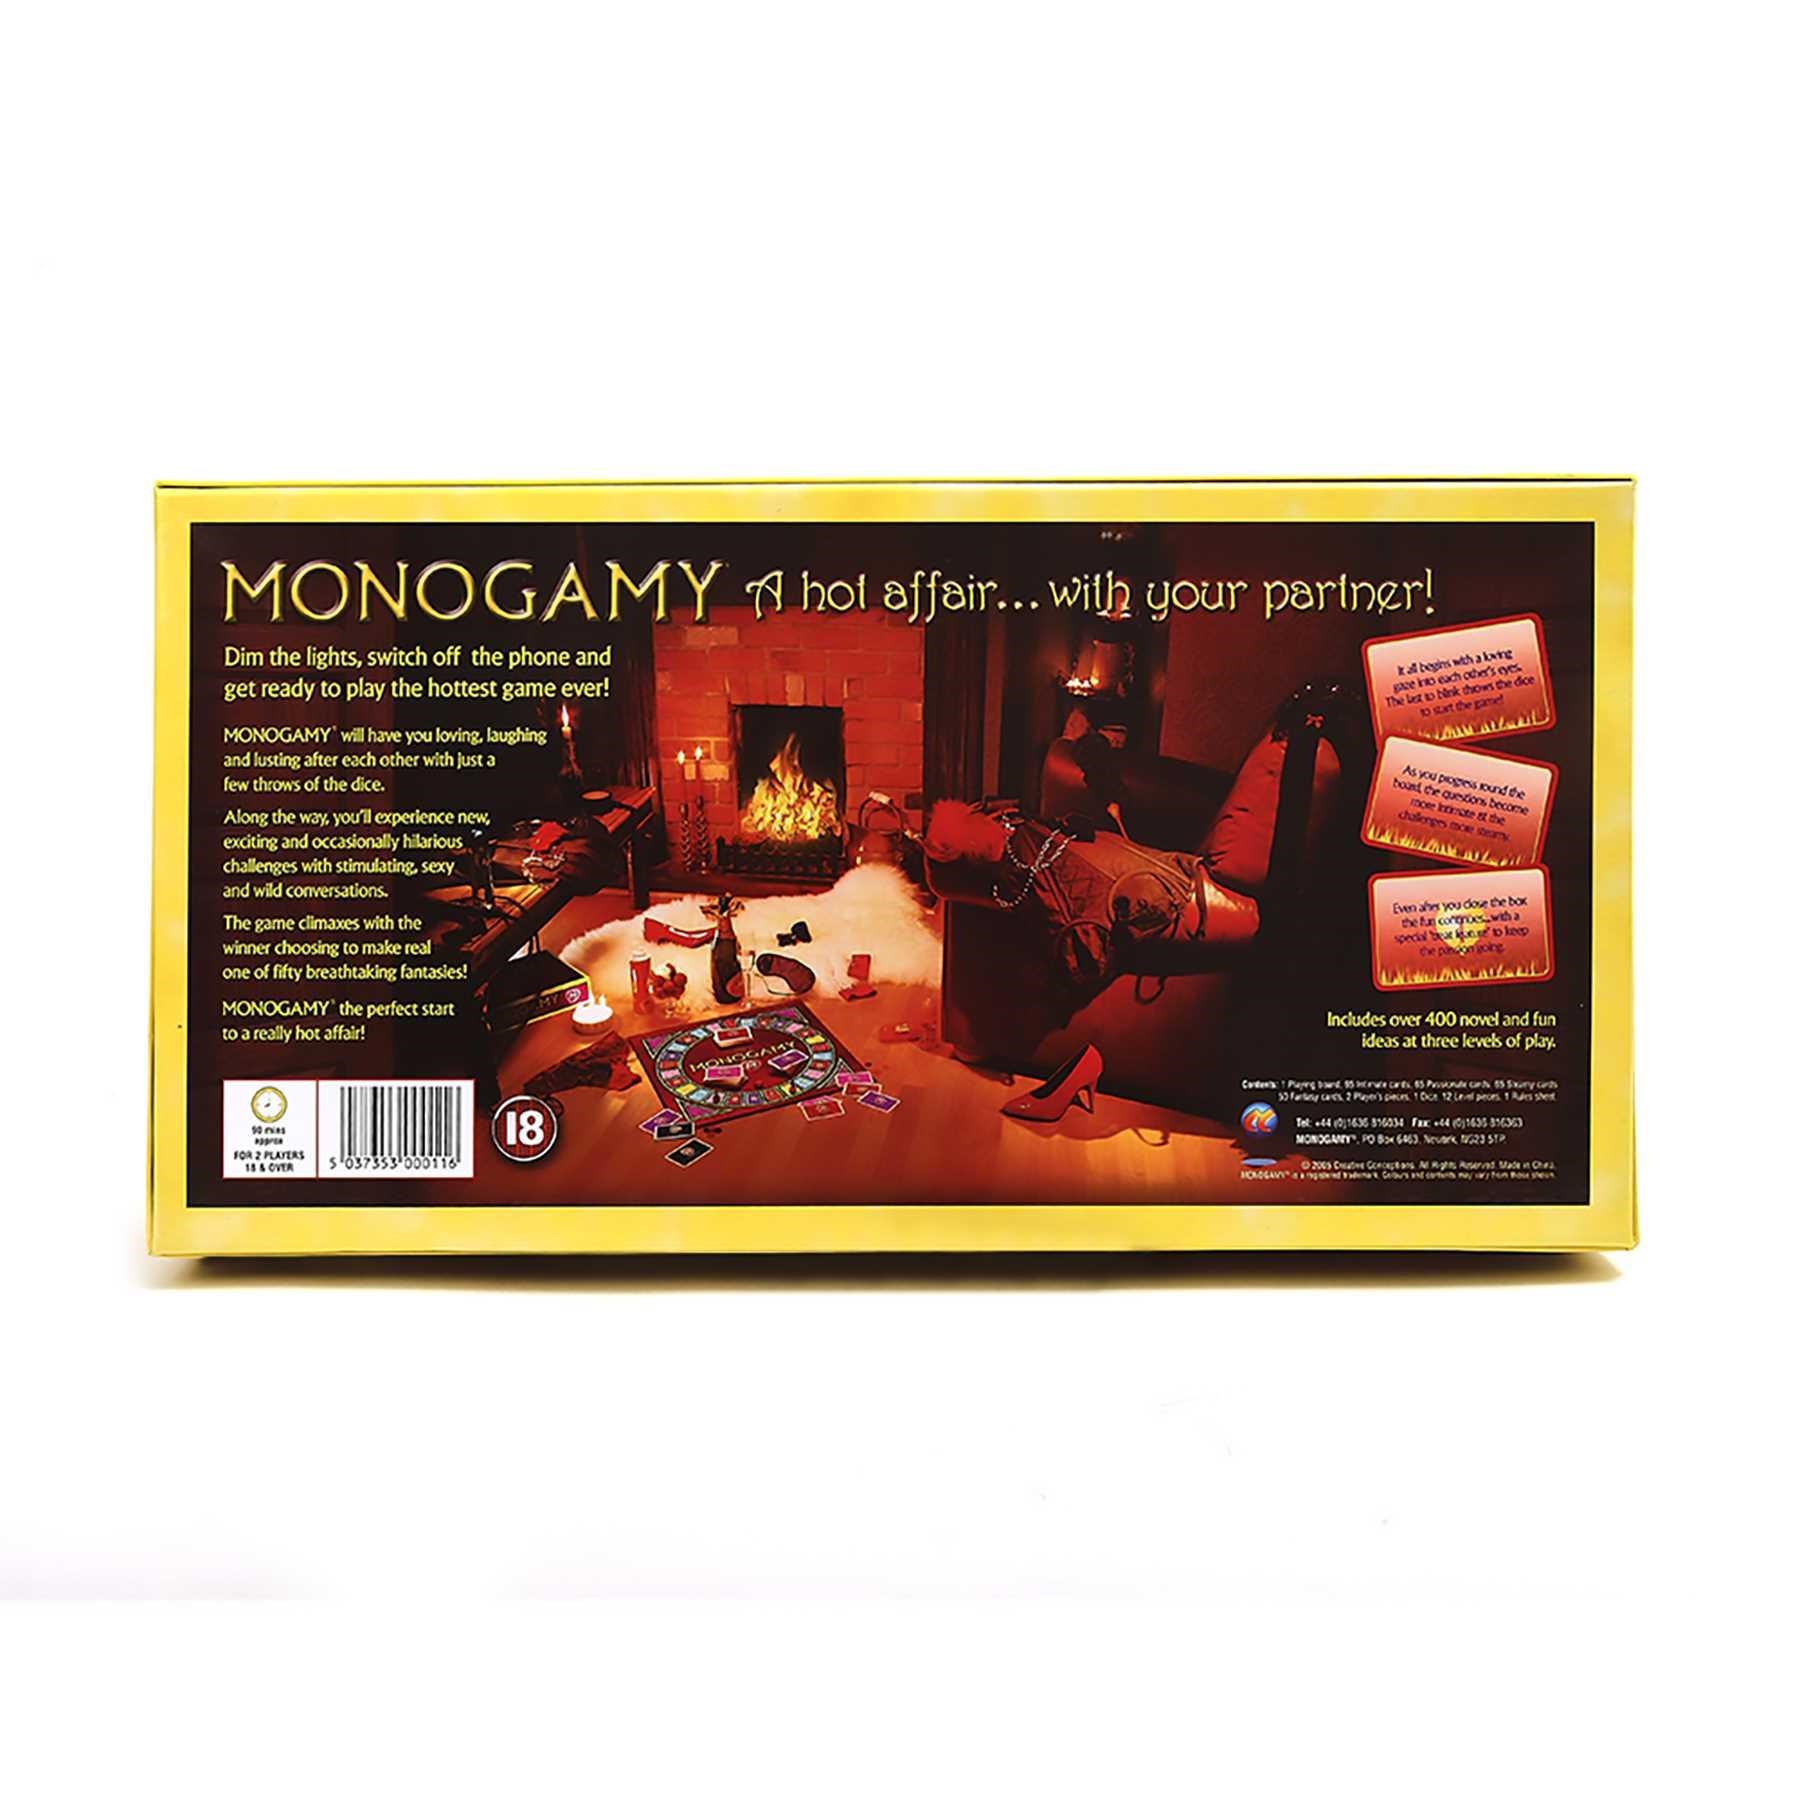 Monogamy A Hot Affair With Your Partner Game Box and game components Spanish back of box